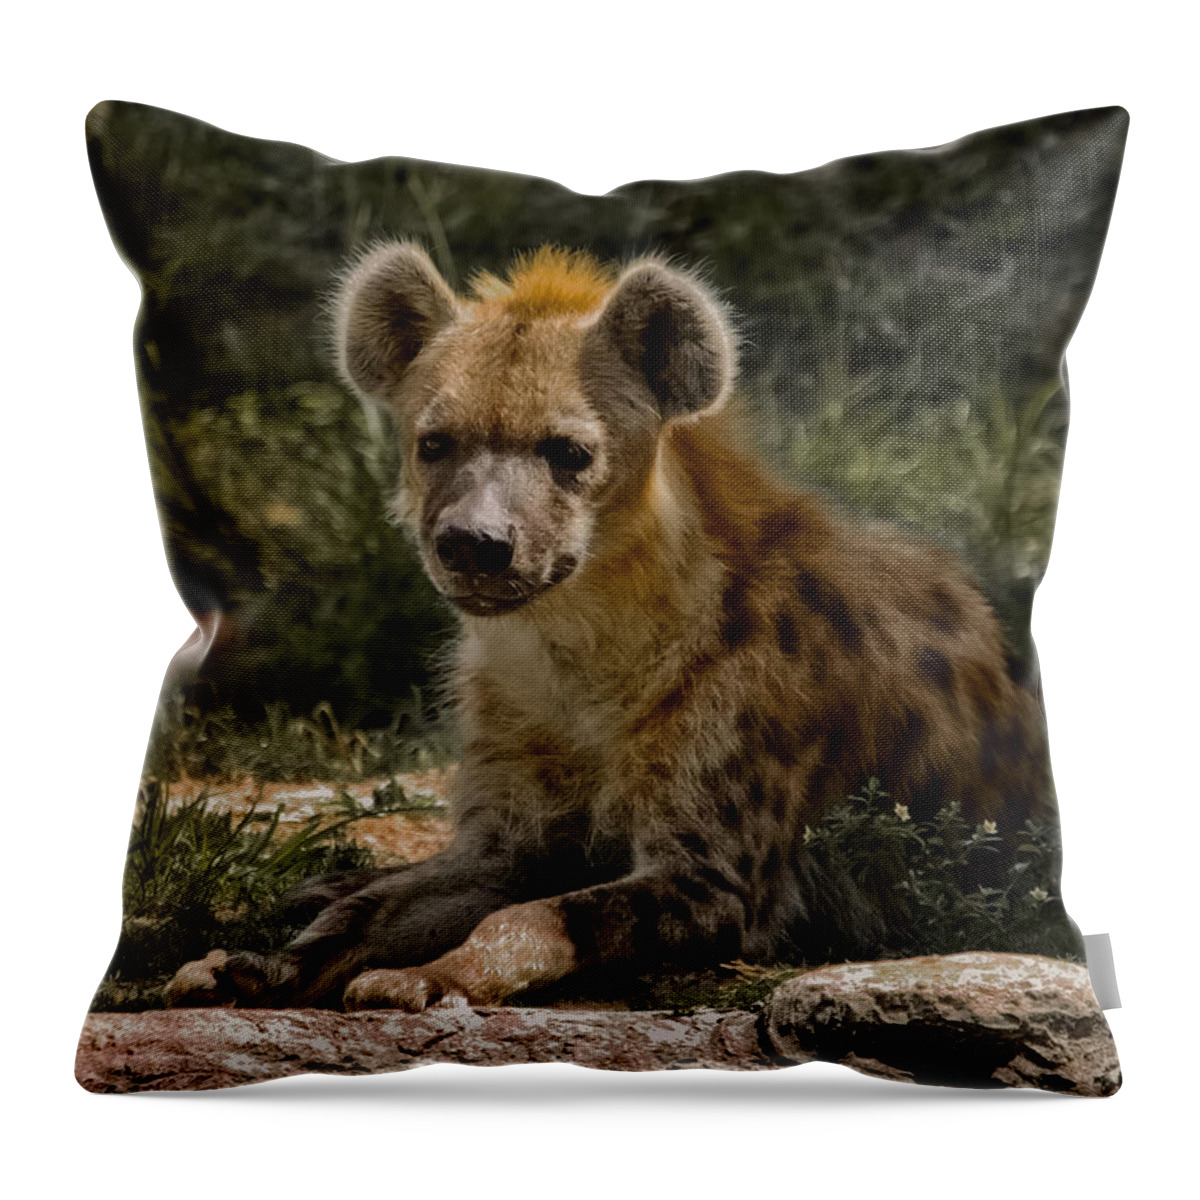 Spotted Hyena Throw Pillow featuring the photograph My Friends Call Me Spike by DigiArt Diaries by Vicky B Fuller